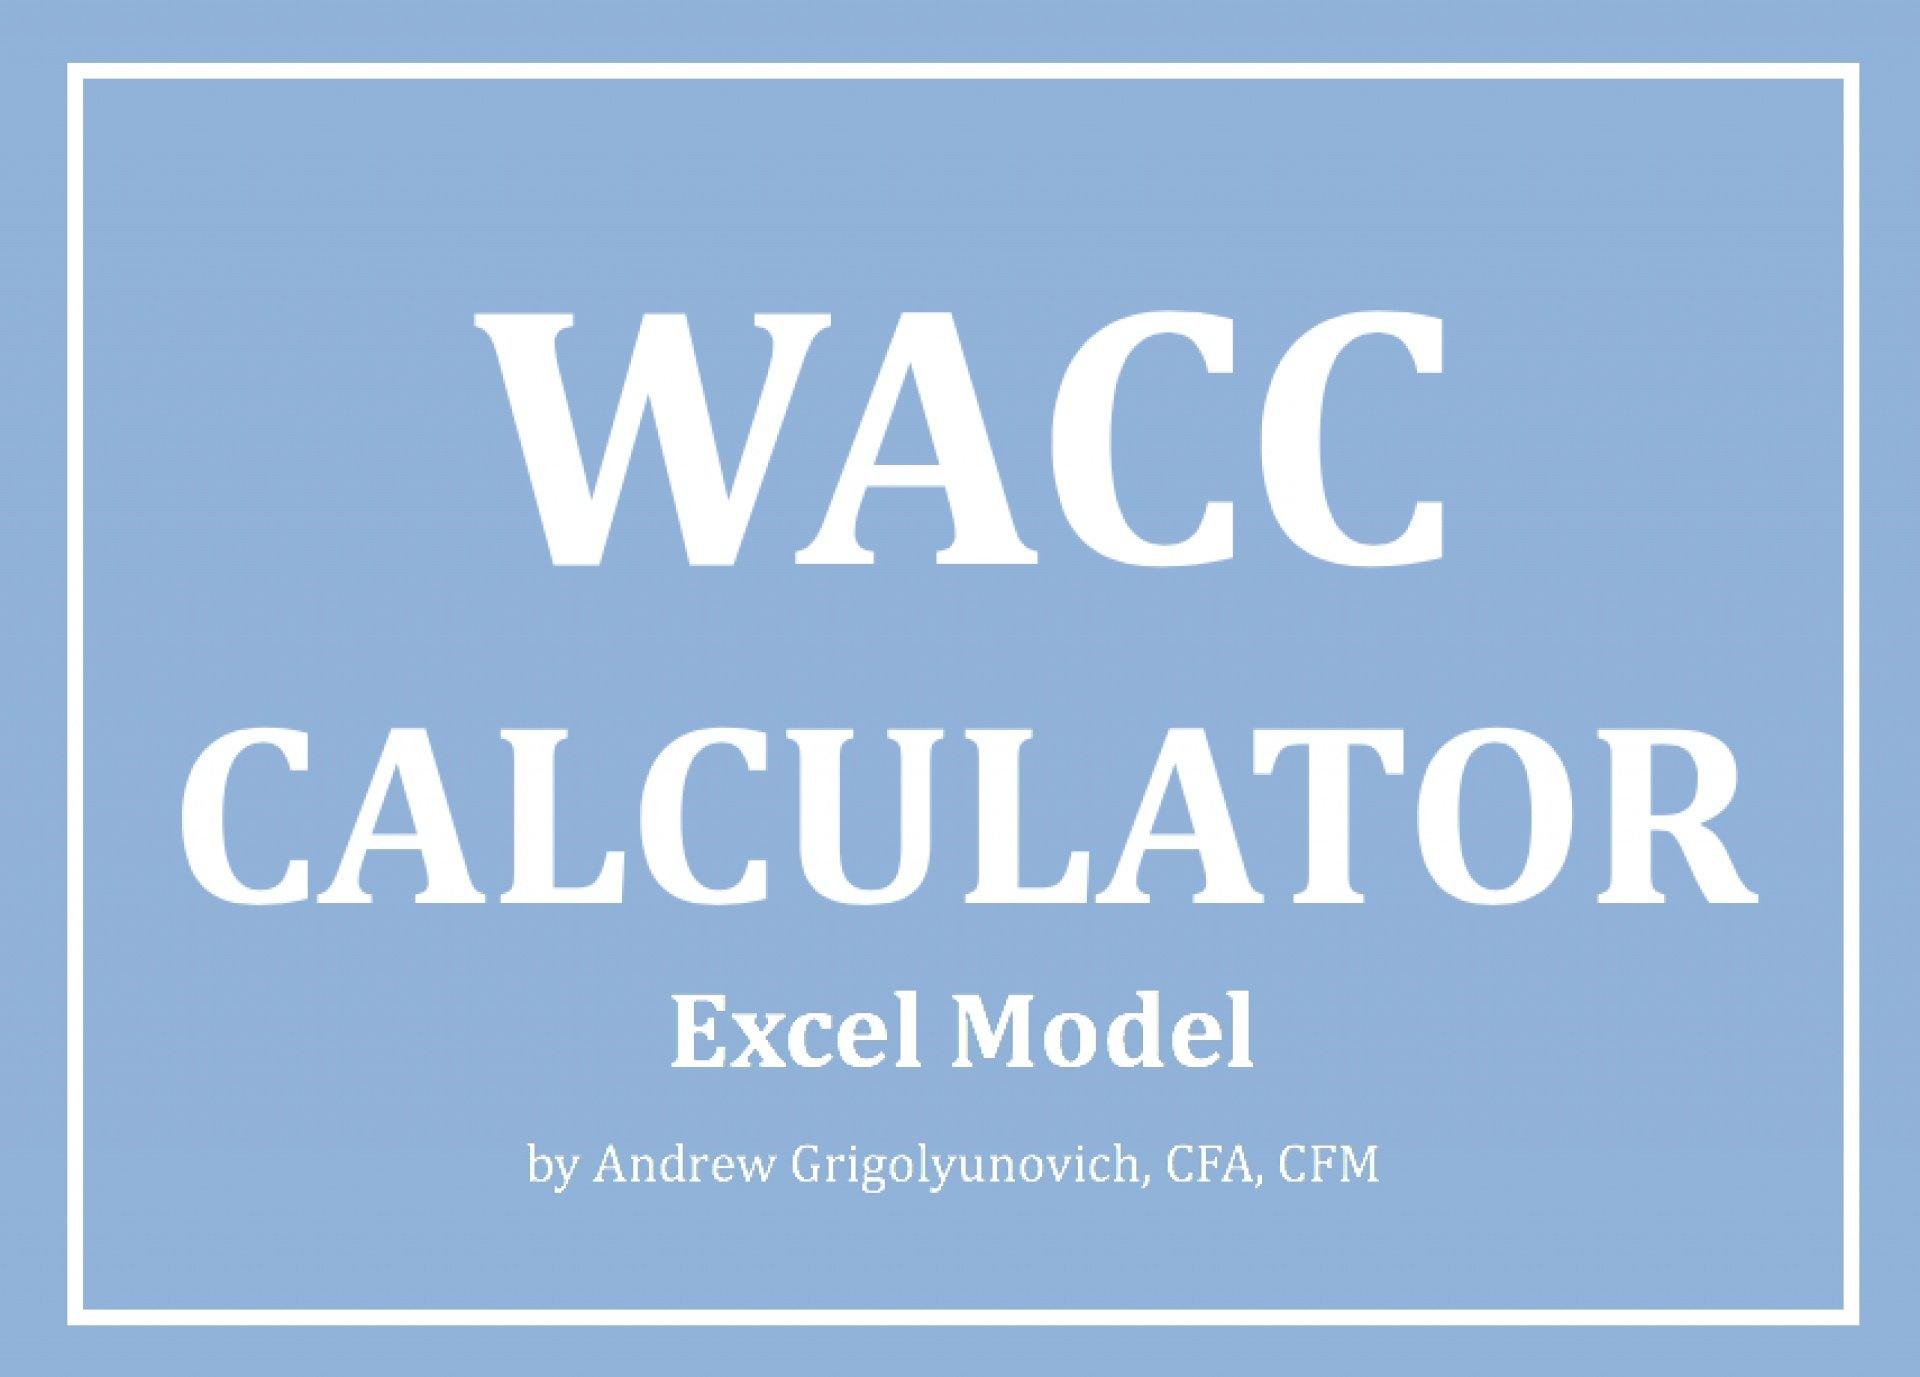 WACC Calculator (Weighted Average Cost of Capital)